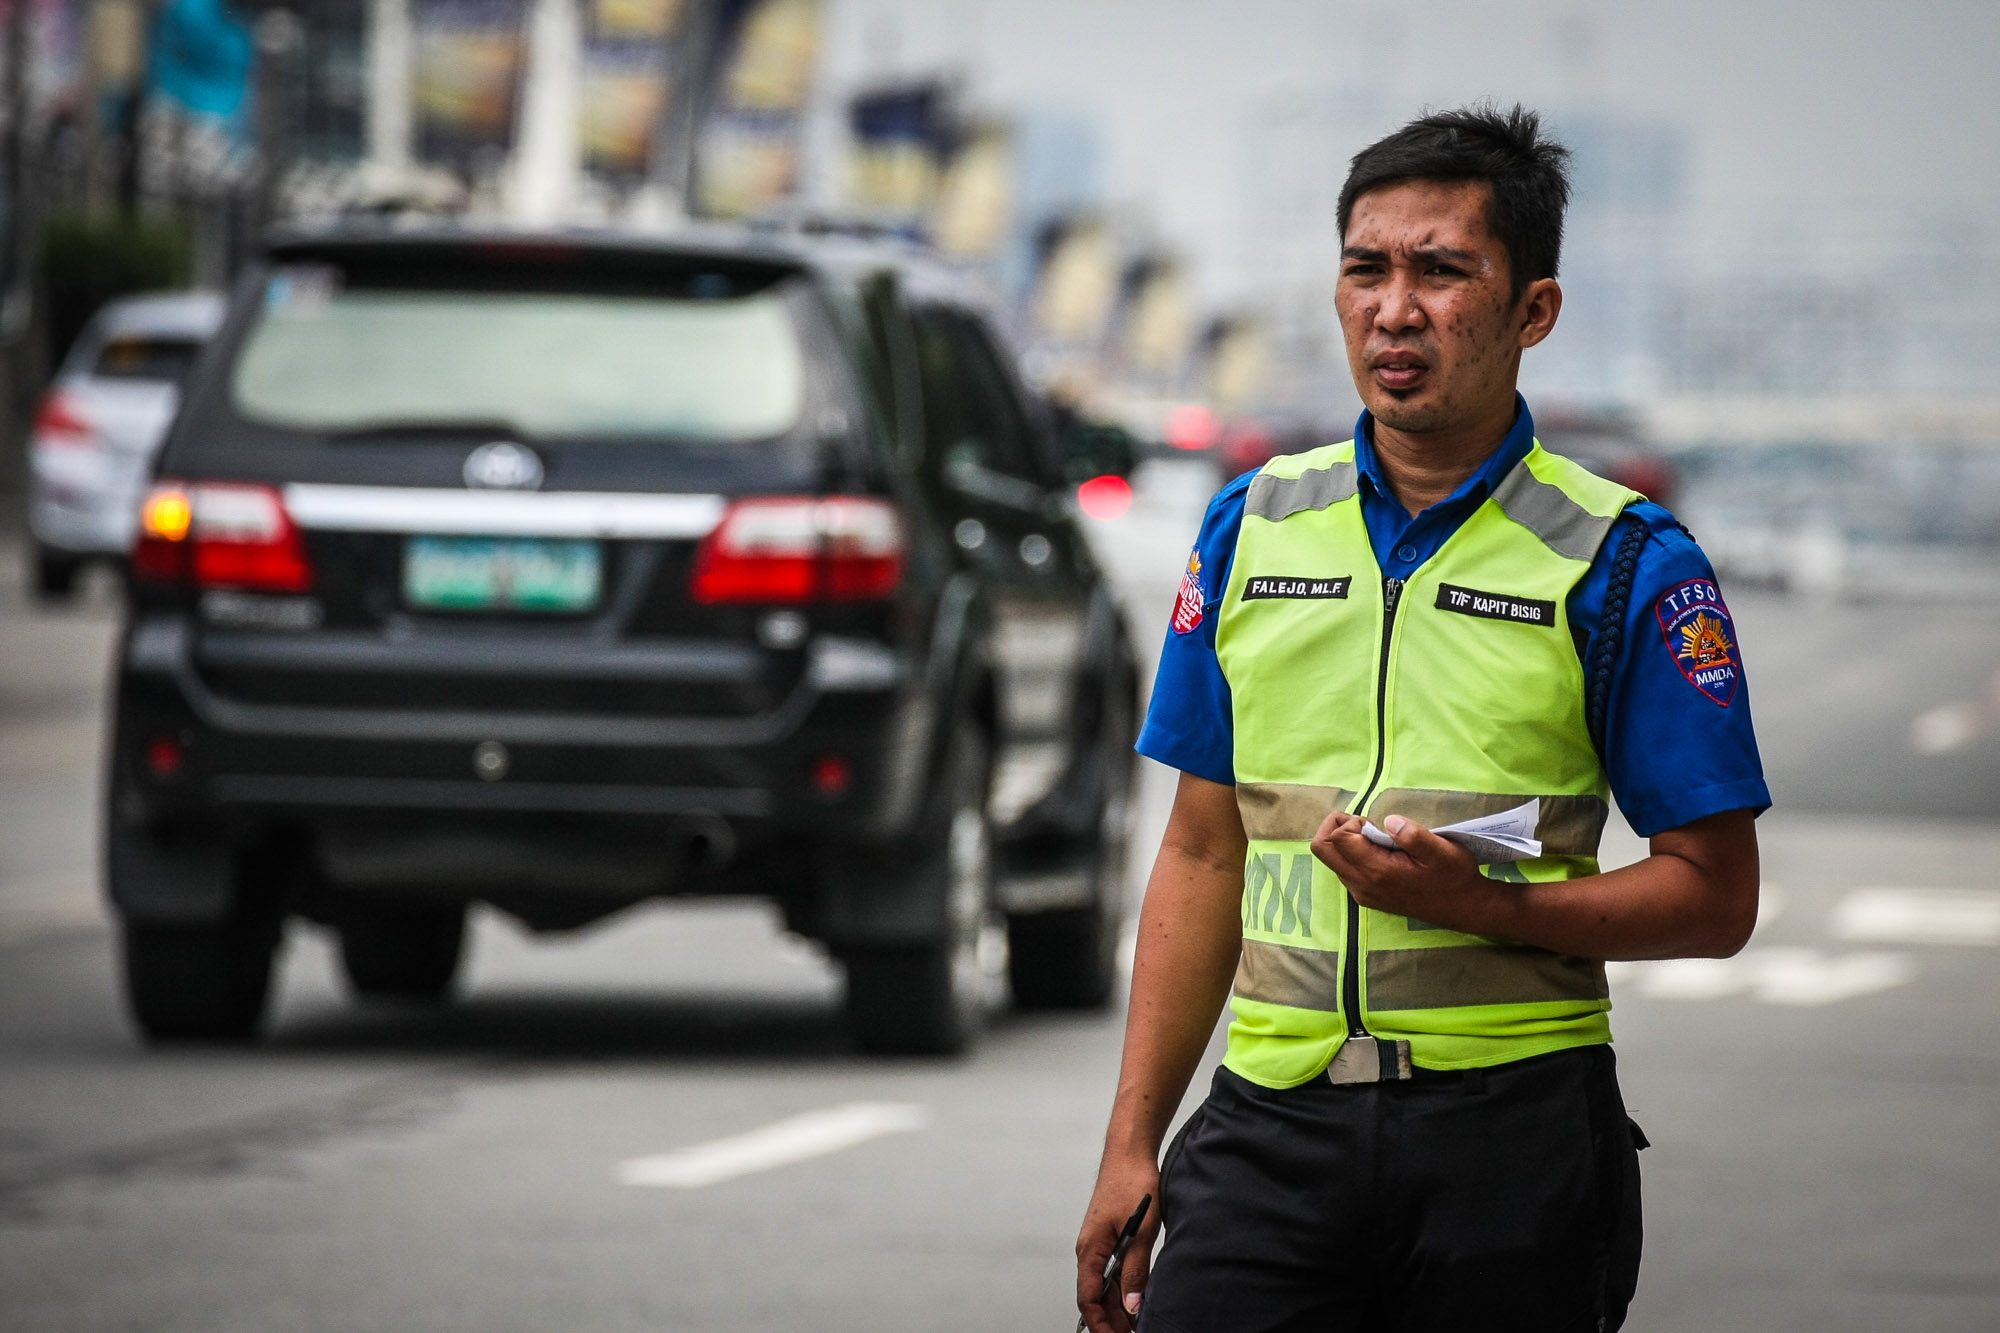 MMDA to ask Duterte hazard pay for traffic enforcers